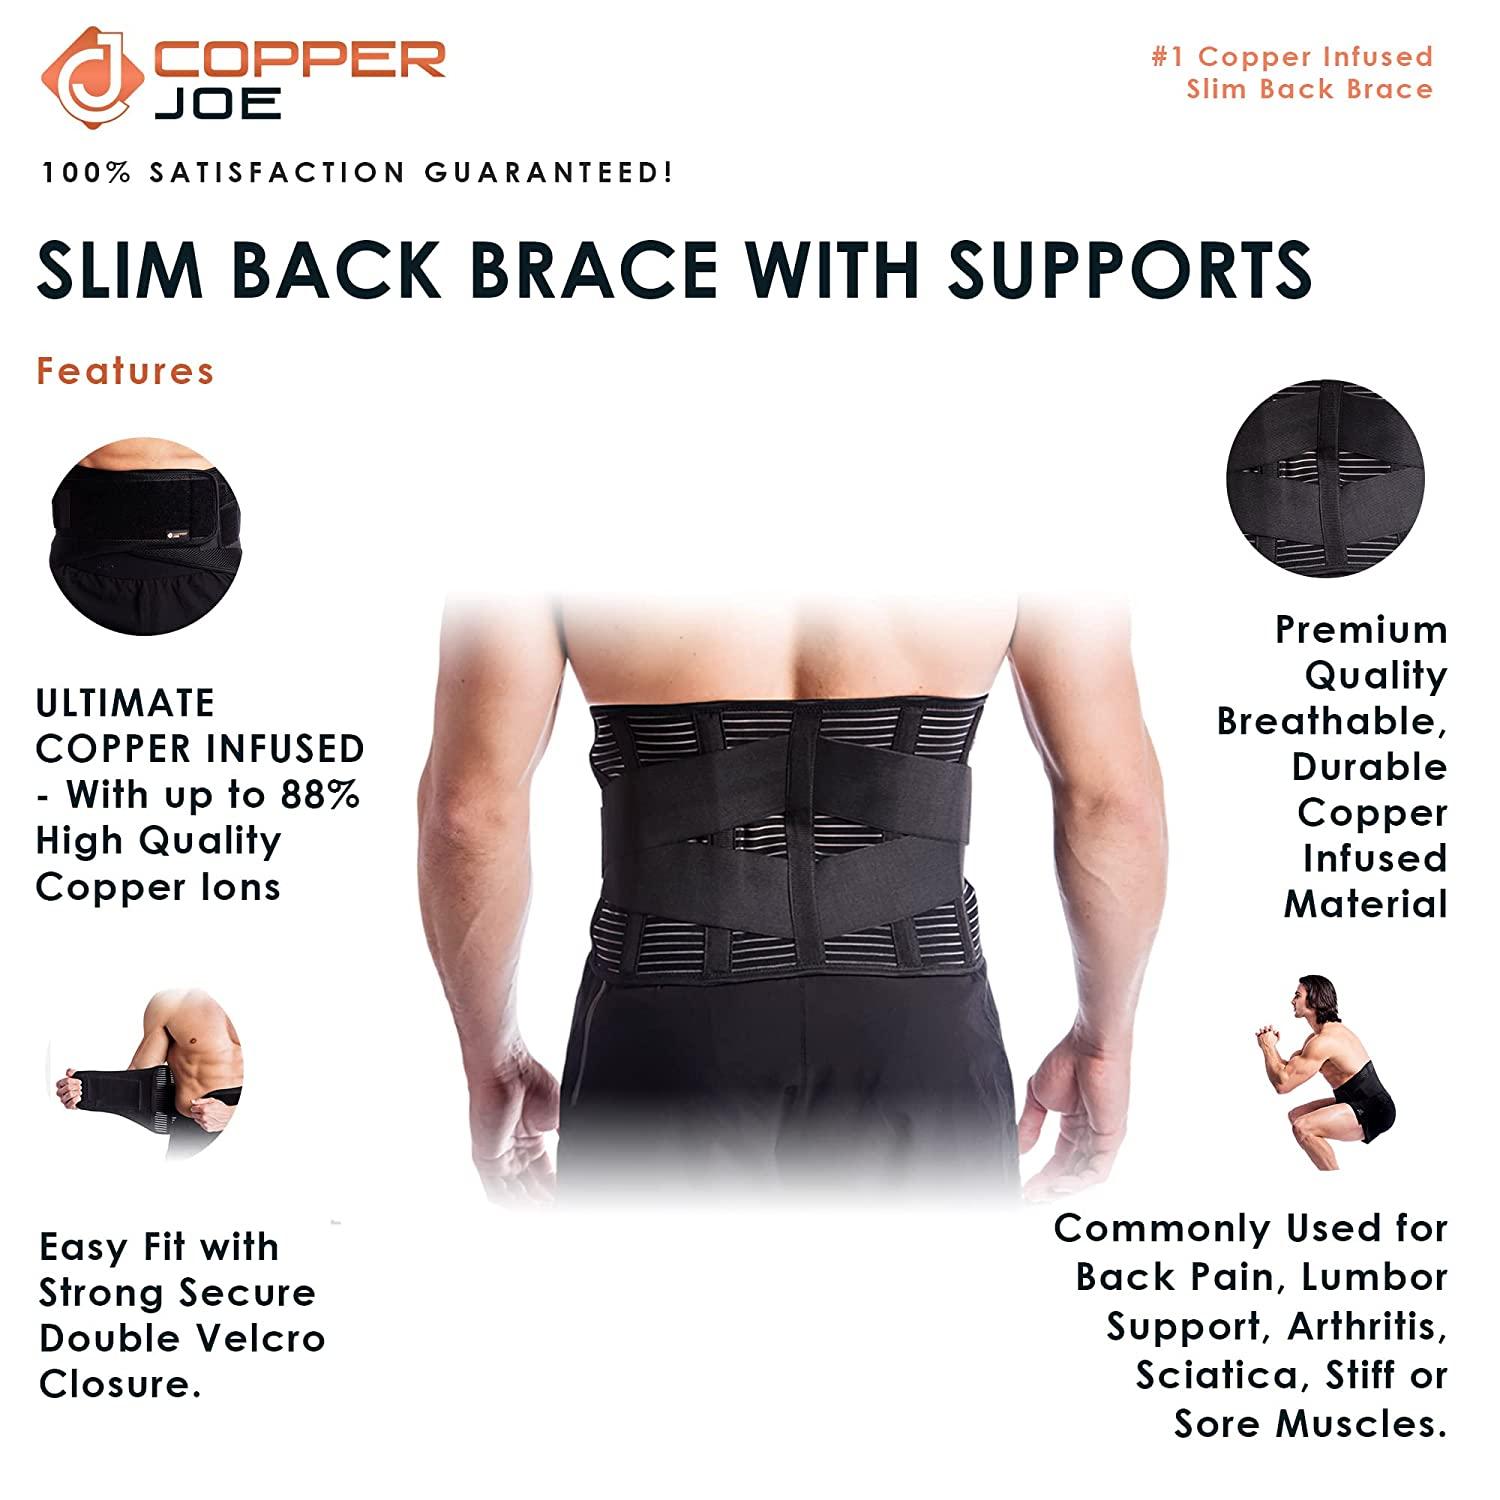 Copper Joe Ultimate Copper Infused Back Brace - Relief from Back Pain,  Herniated Disc, Sciatica, Scoliosis and more! Breathable Waist Lumbar Lower  Back Brace w Slim Design and Extra Support Bars. For